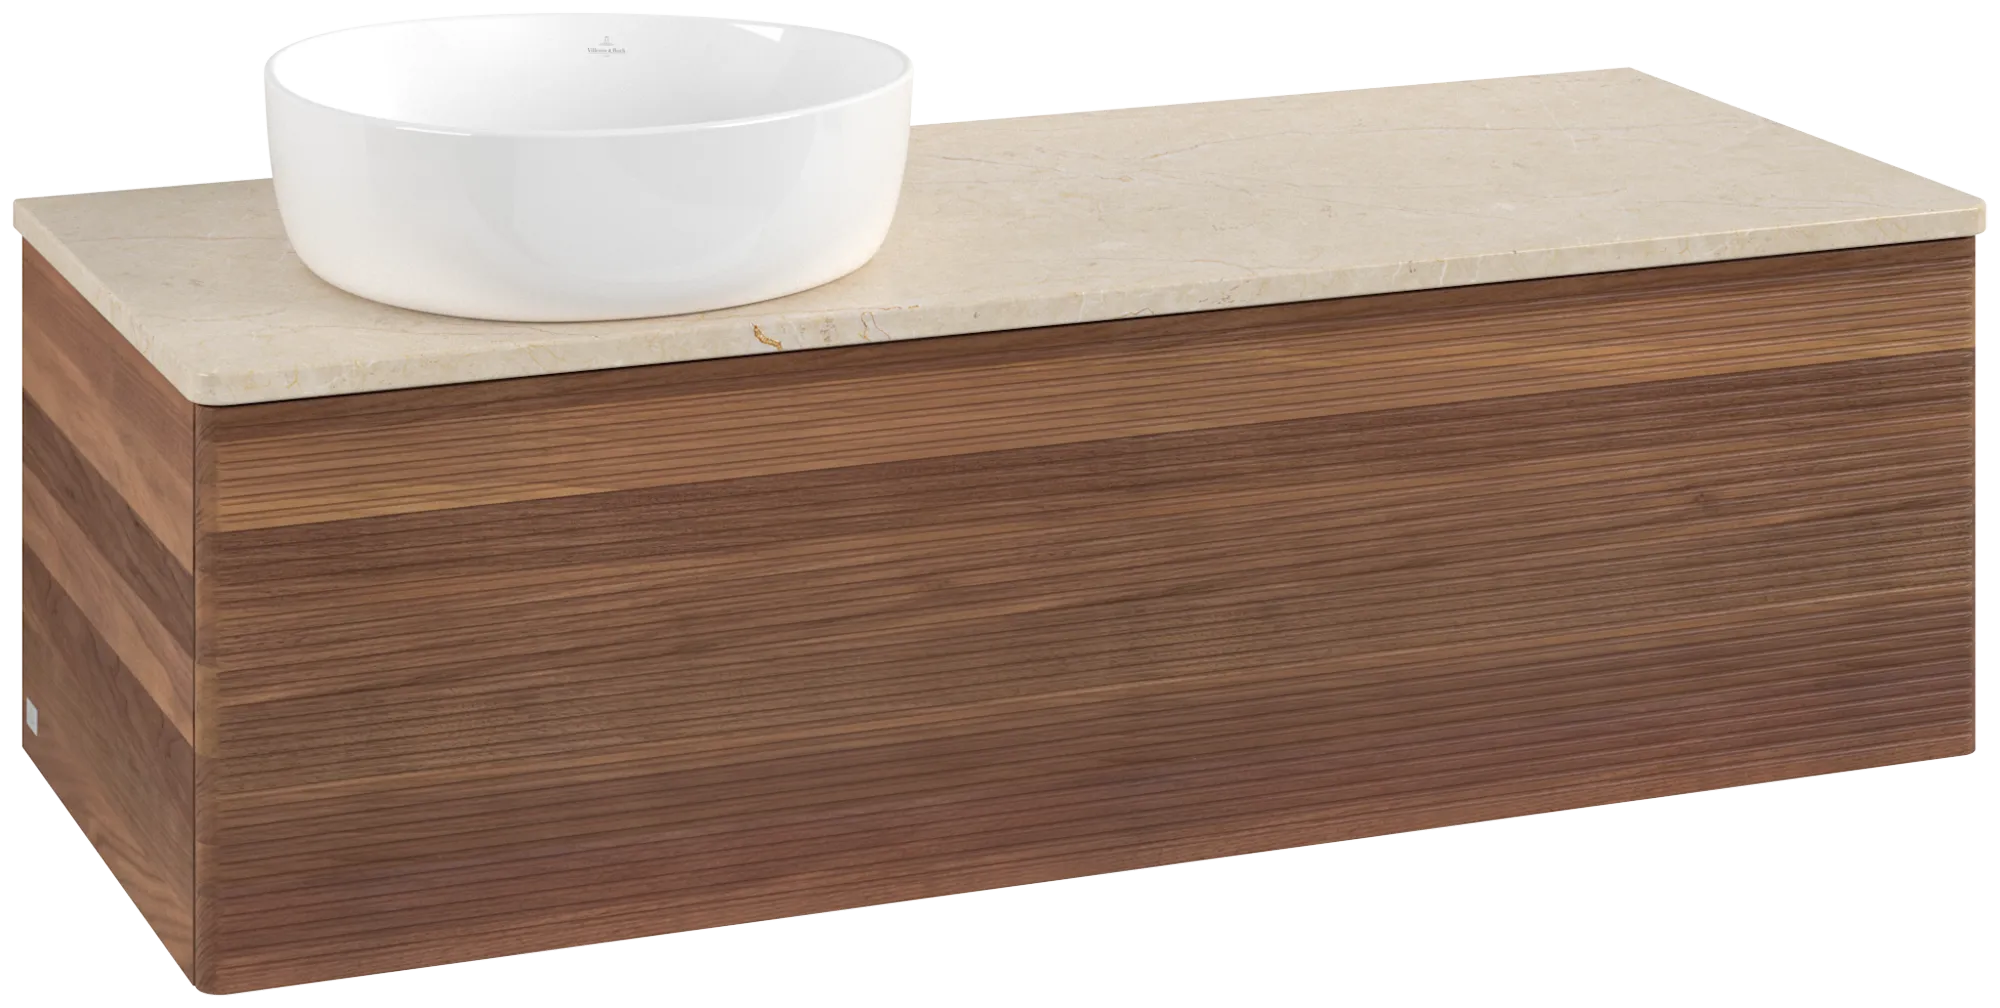 VILLEROY BOCH Antao Vanity unit, with lighting, 1 pull-out compartment, 1200 x 360 x 500 mm, Front with grain texture, Warm Walnut / Botticino #L33113HM resmi